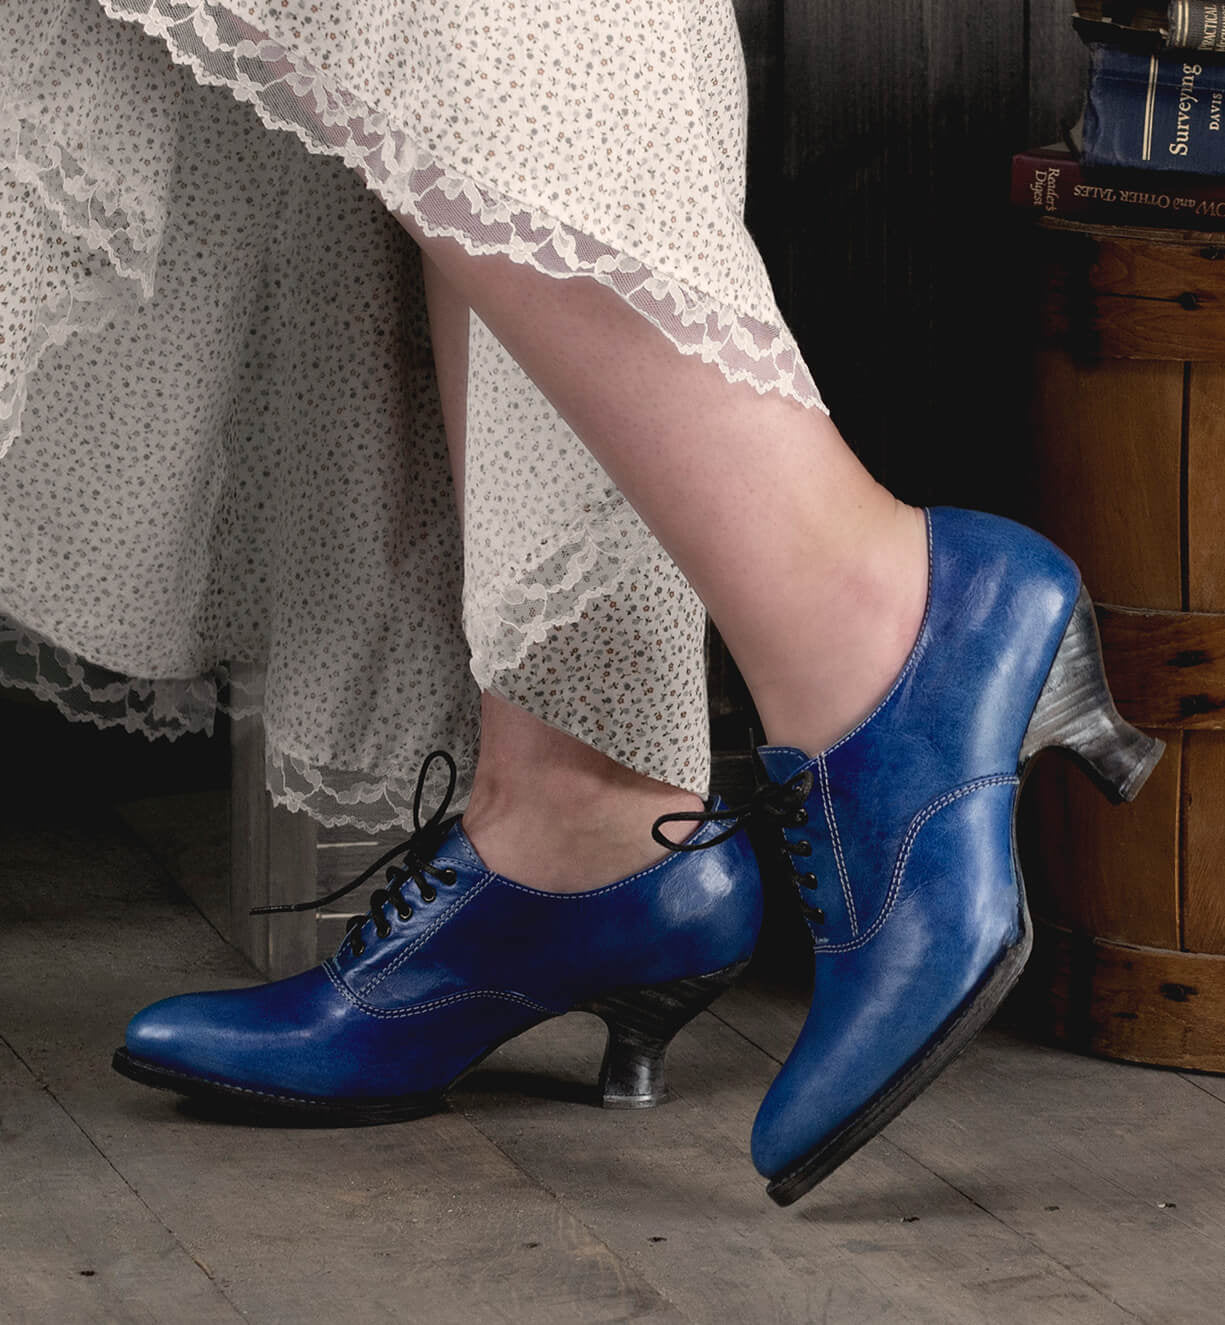 A woman's feet in Oak Tree Farms' Janet lace-up leather shoes on a wooden floor with a neutral look.